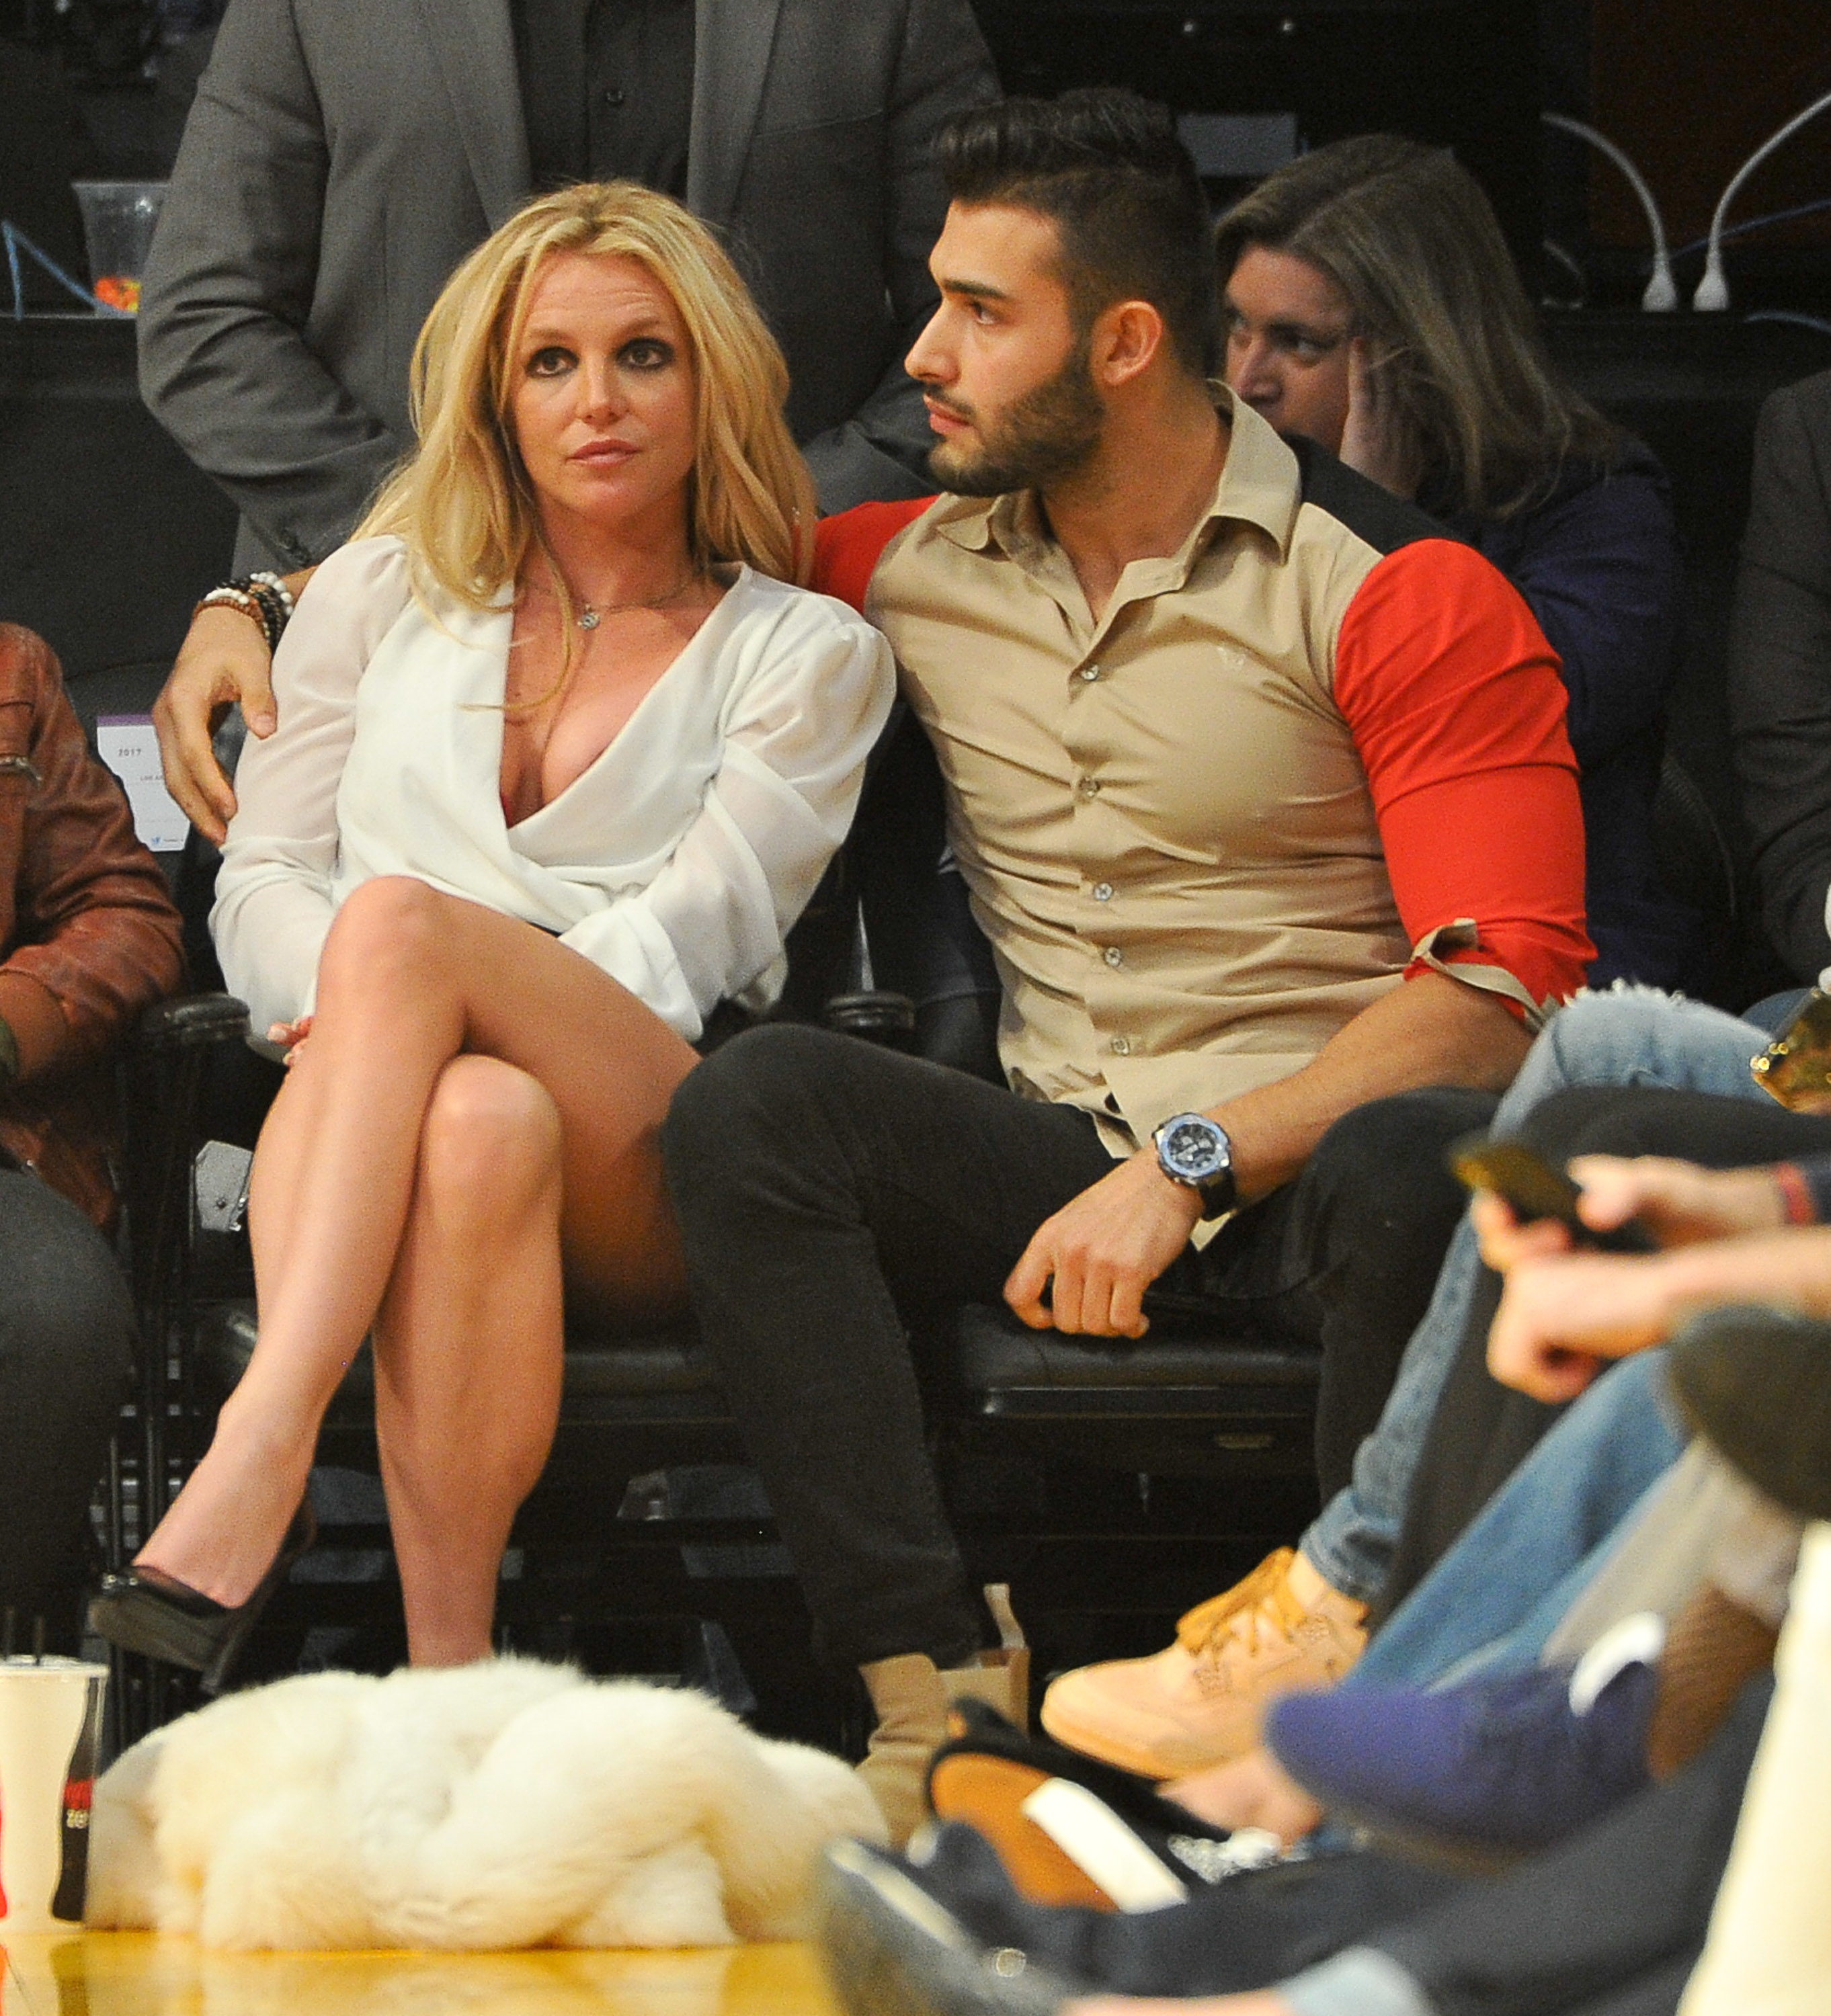 Close-up of Britney and Sam in the audience at a sports event